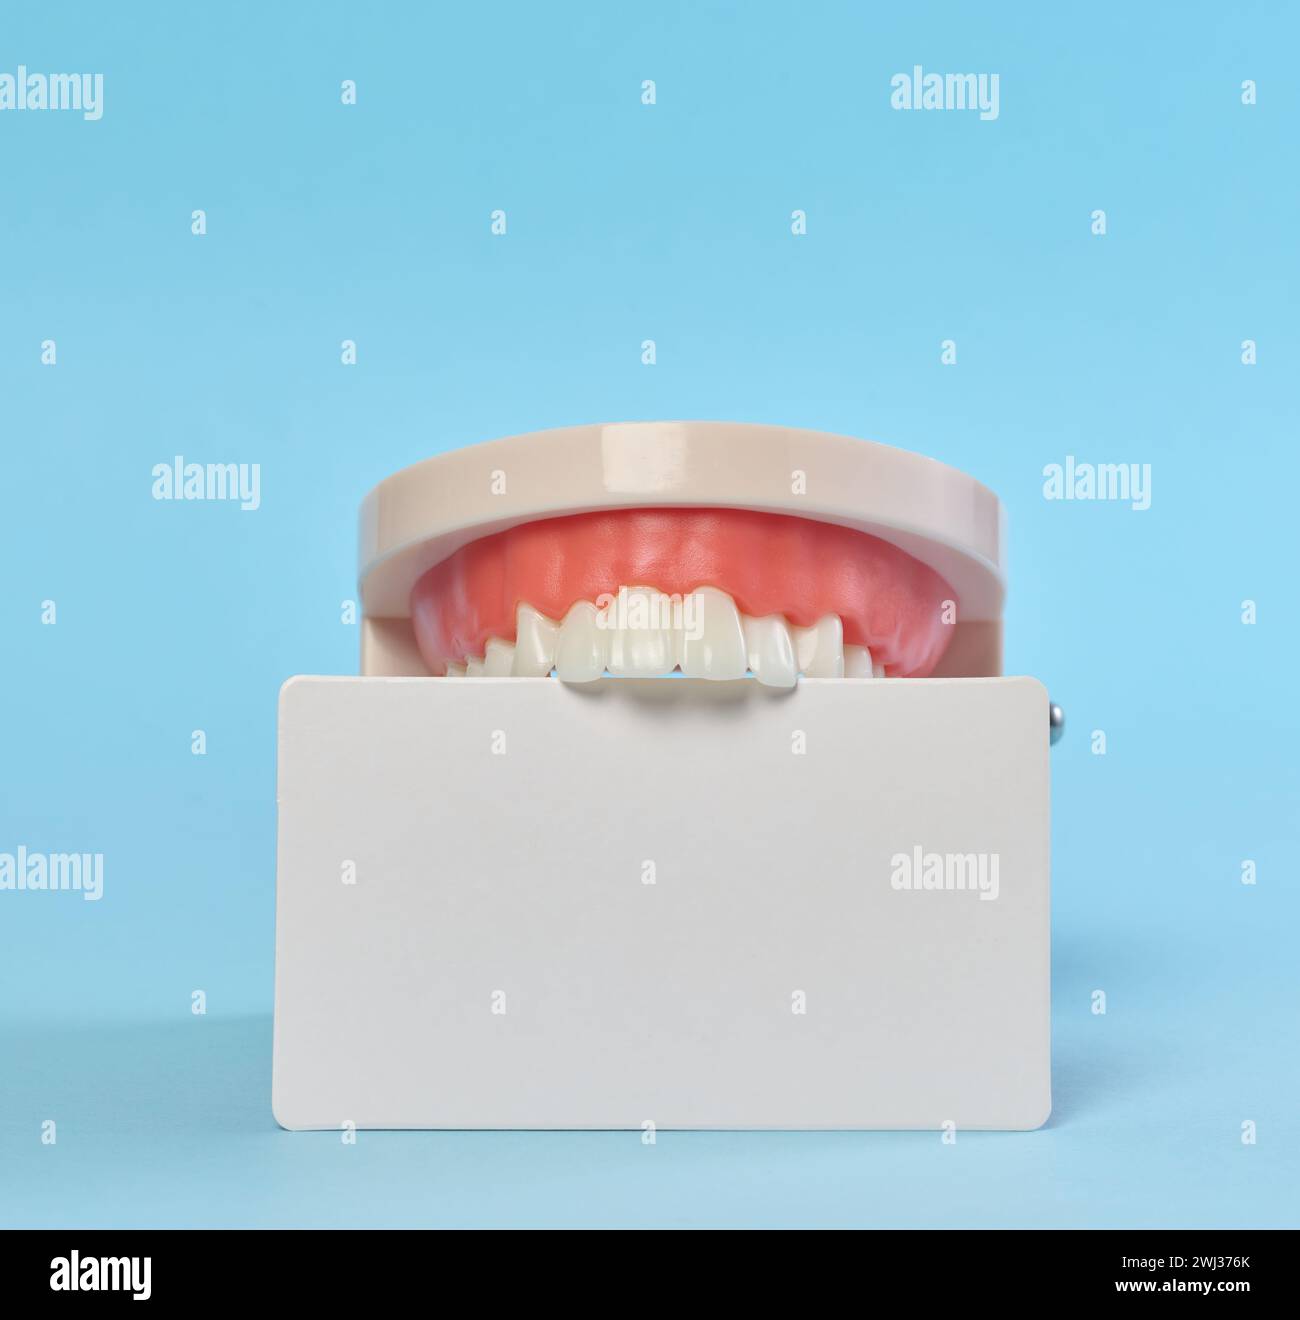 Plastic model of a human jaw and a blank white business card on a blue background Stock Photo